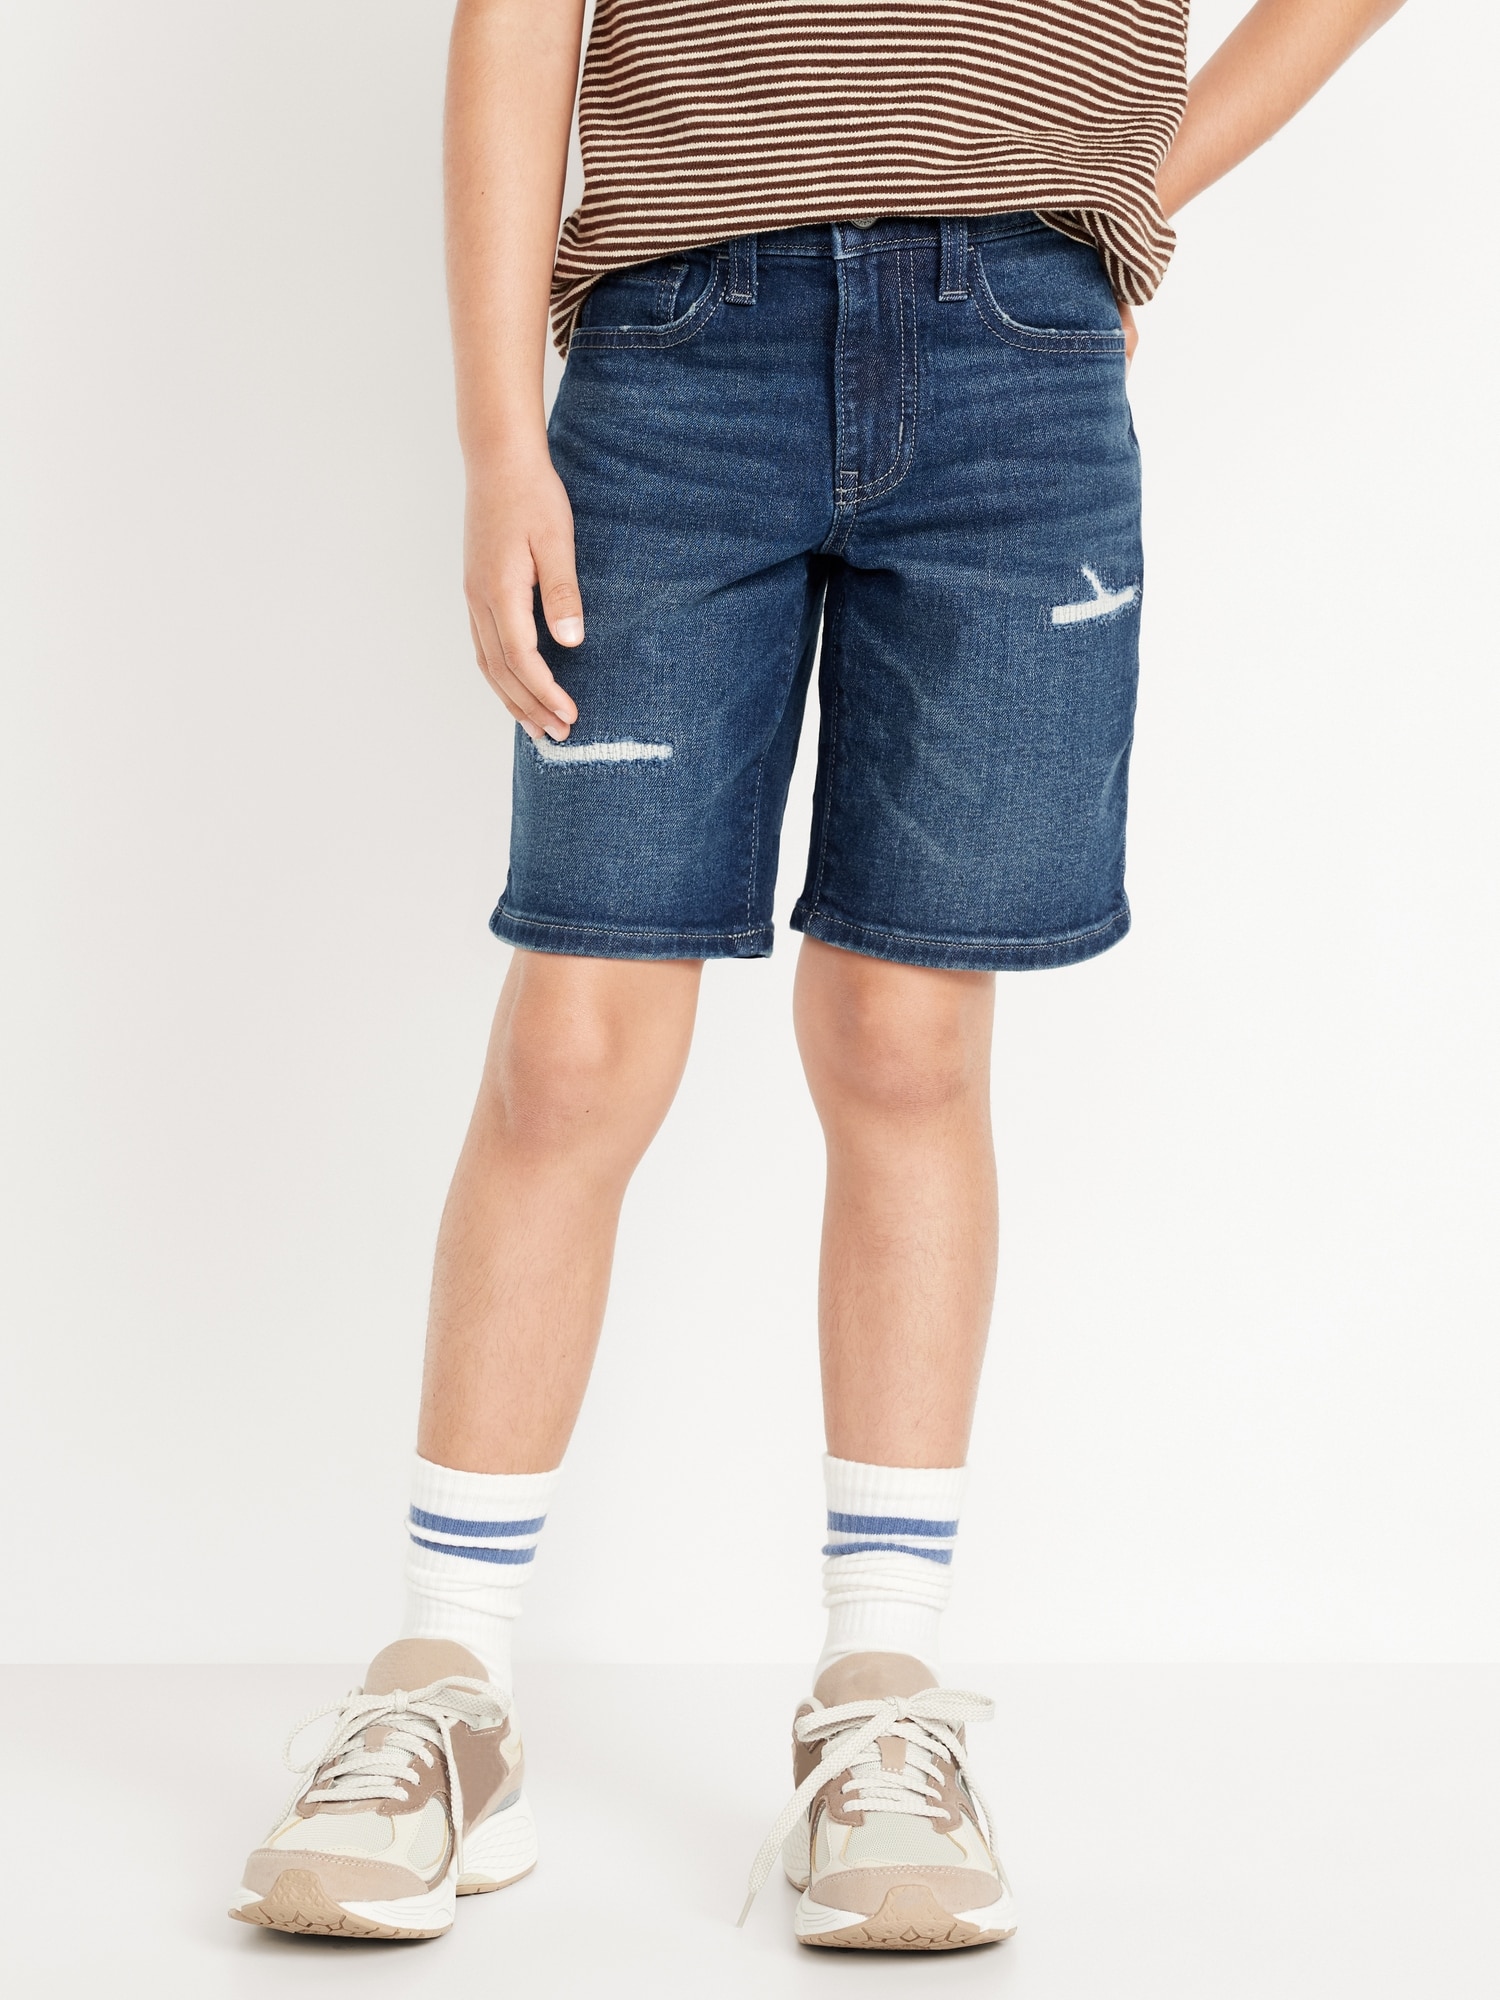 360° Stretch Ripped Jean Shorts for Boys (Above Knee) Hot Deal